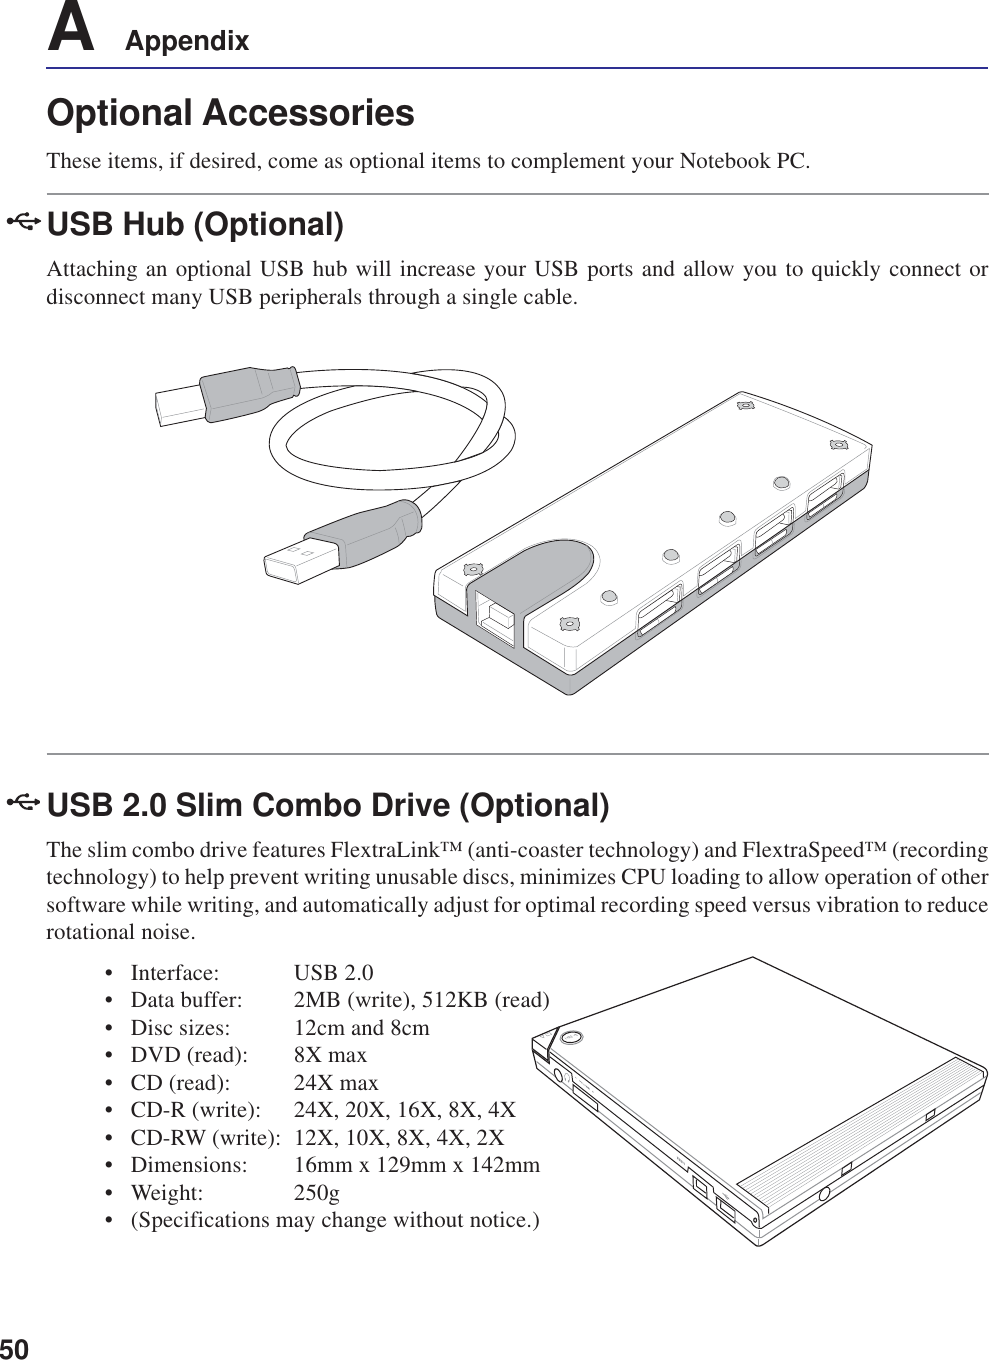 50A    AppendixOptional AccessoriesThese items, if desired, come as optional items to complement your Notebook PC.USB Hub (Optional)Attaching an optional USB hub will increase your USB ports and allow you to quickly connect ordisconnect many USB peripherals through a single cable.USB 2.0 Slim Combo Drive (Optional)The slim combo drive features FlextraLink™ (anti-coaster technology) and FlextraSpeed™ (recordingtechnology) to help prevent writing unusable discs, minimizes CPU loading to allow operation of othersoftware while writing, and automatically adjust for optimal recording speed versus vibration to reducerotational noise.• Interface: USB 2.0• Data buffer: 2MB (write), 512KB (read)• Disc sizes: 12cm and 8cm• DVD (read): 8X max• CD (read): 24X max• CD-R (write): 24X, 20X, 16X, 8X, 4X• CD-RW (write): 12X, 10X, 8X, 4X, 2X• Dimensions: 16mm x 129mm x 142mm• Weight: 250g• (Specifications may change without notice.)